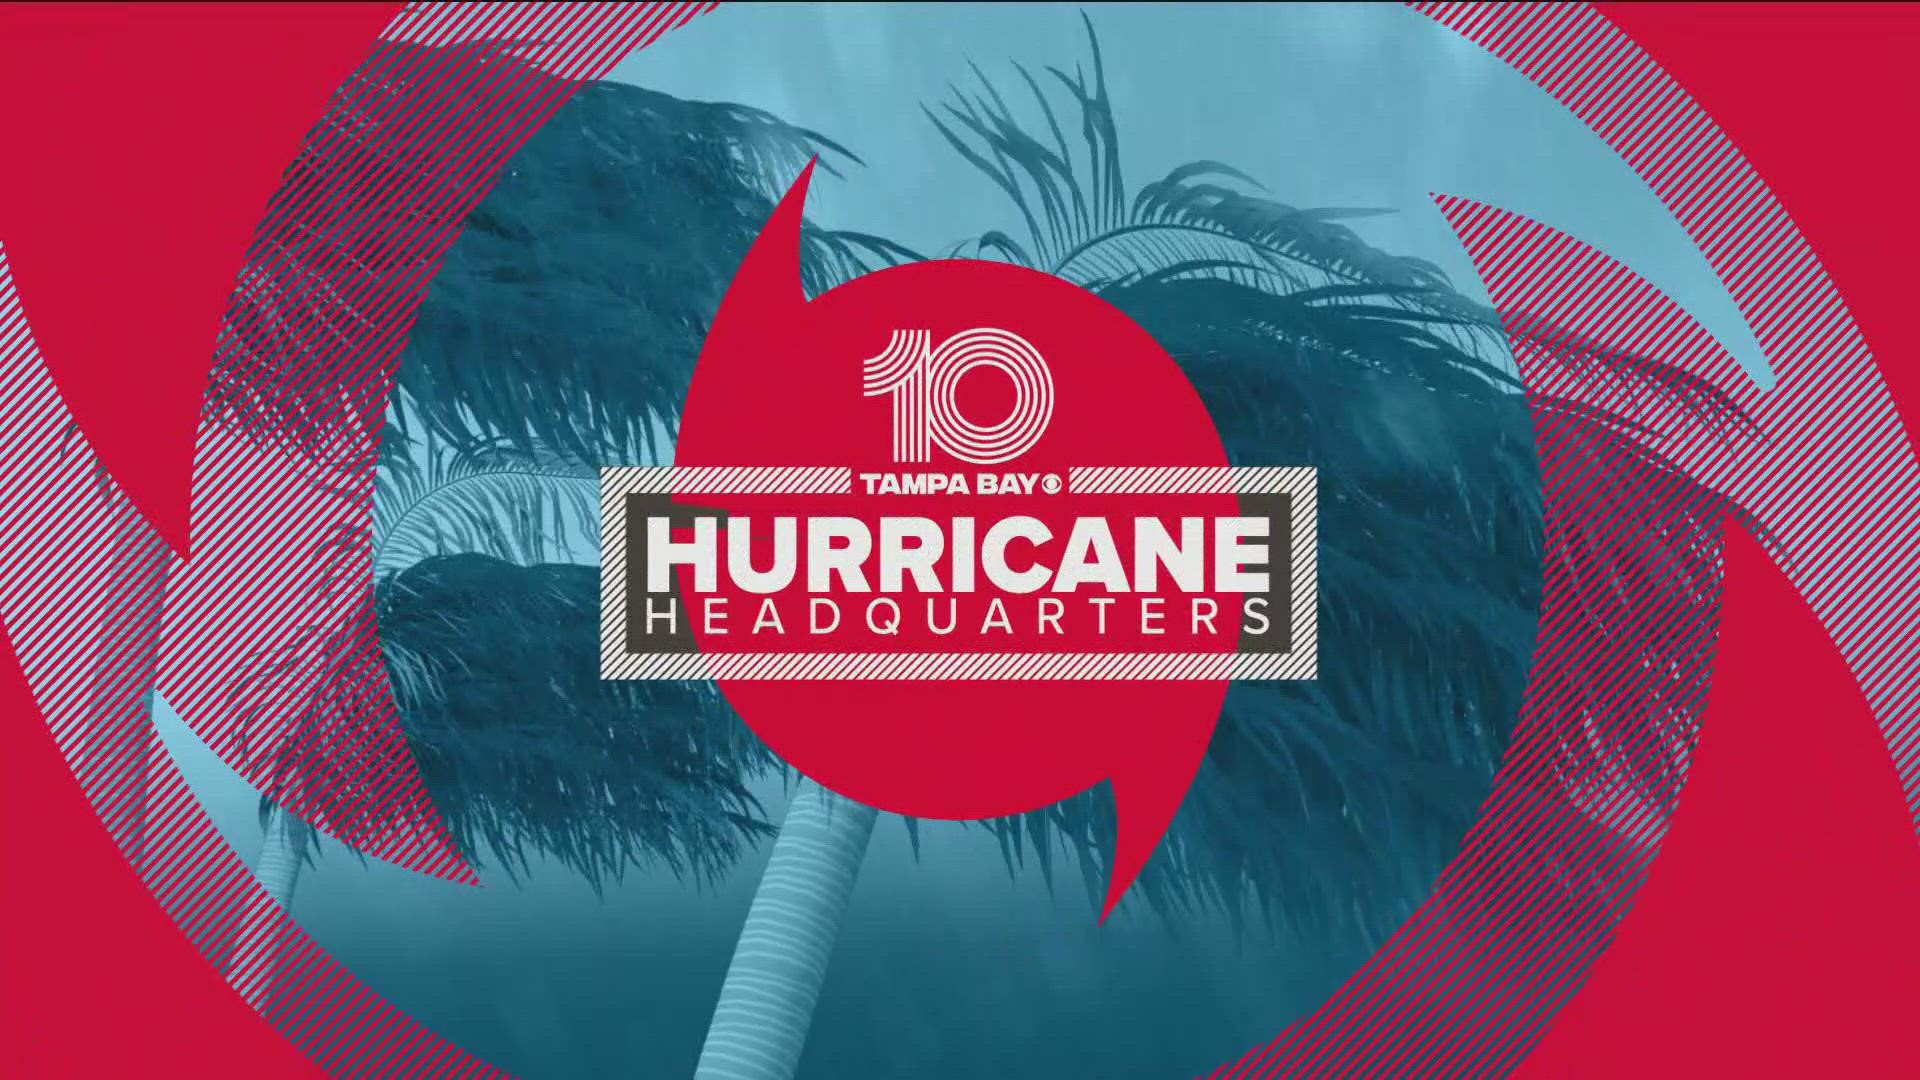 As hurricane season officially comes to a close on Nov. 30, we're looking back at what happened during this "unique" season.